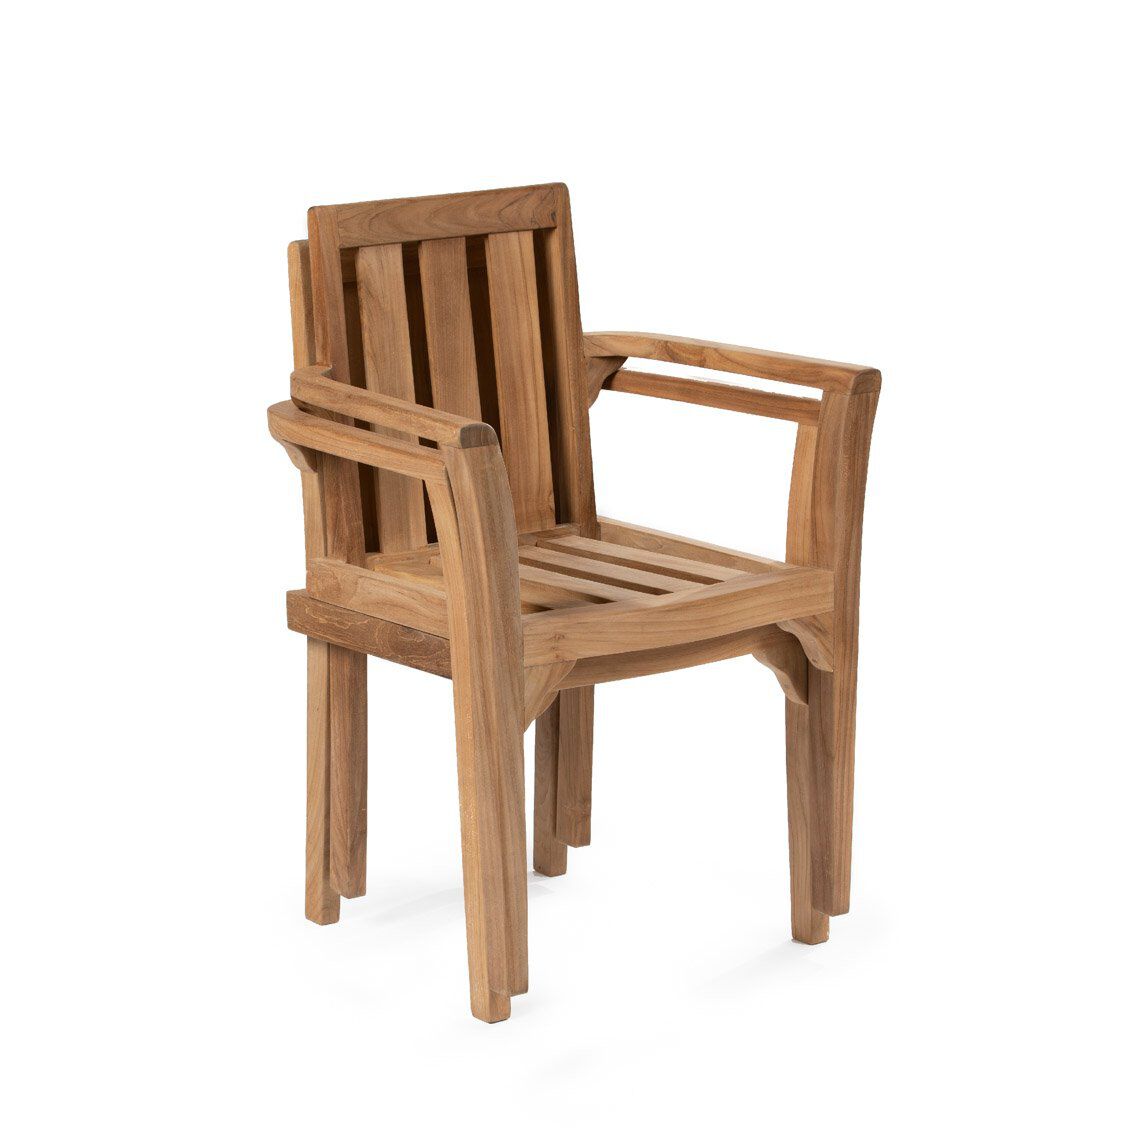 SCRATCH AND DENT - Grade A Teak 2 Pack Classic Stacking Chairs - FINAL SALE